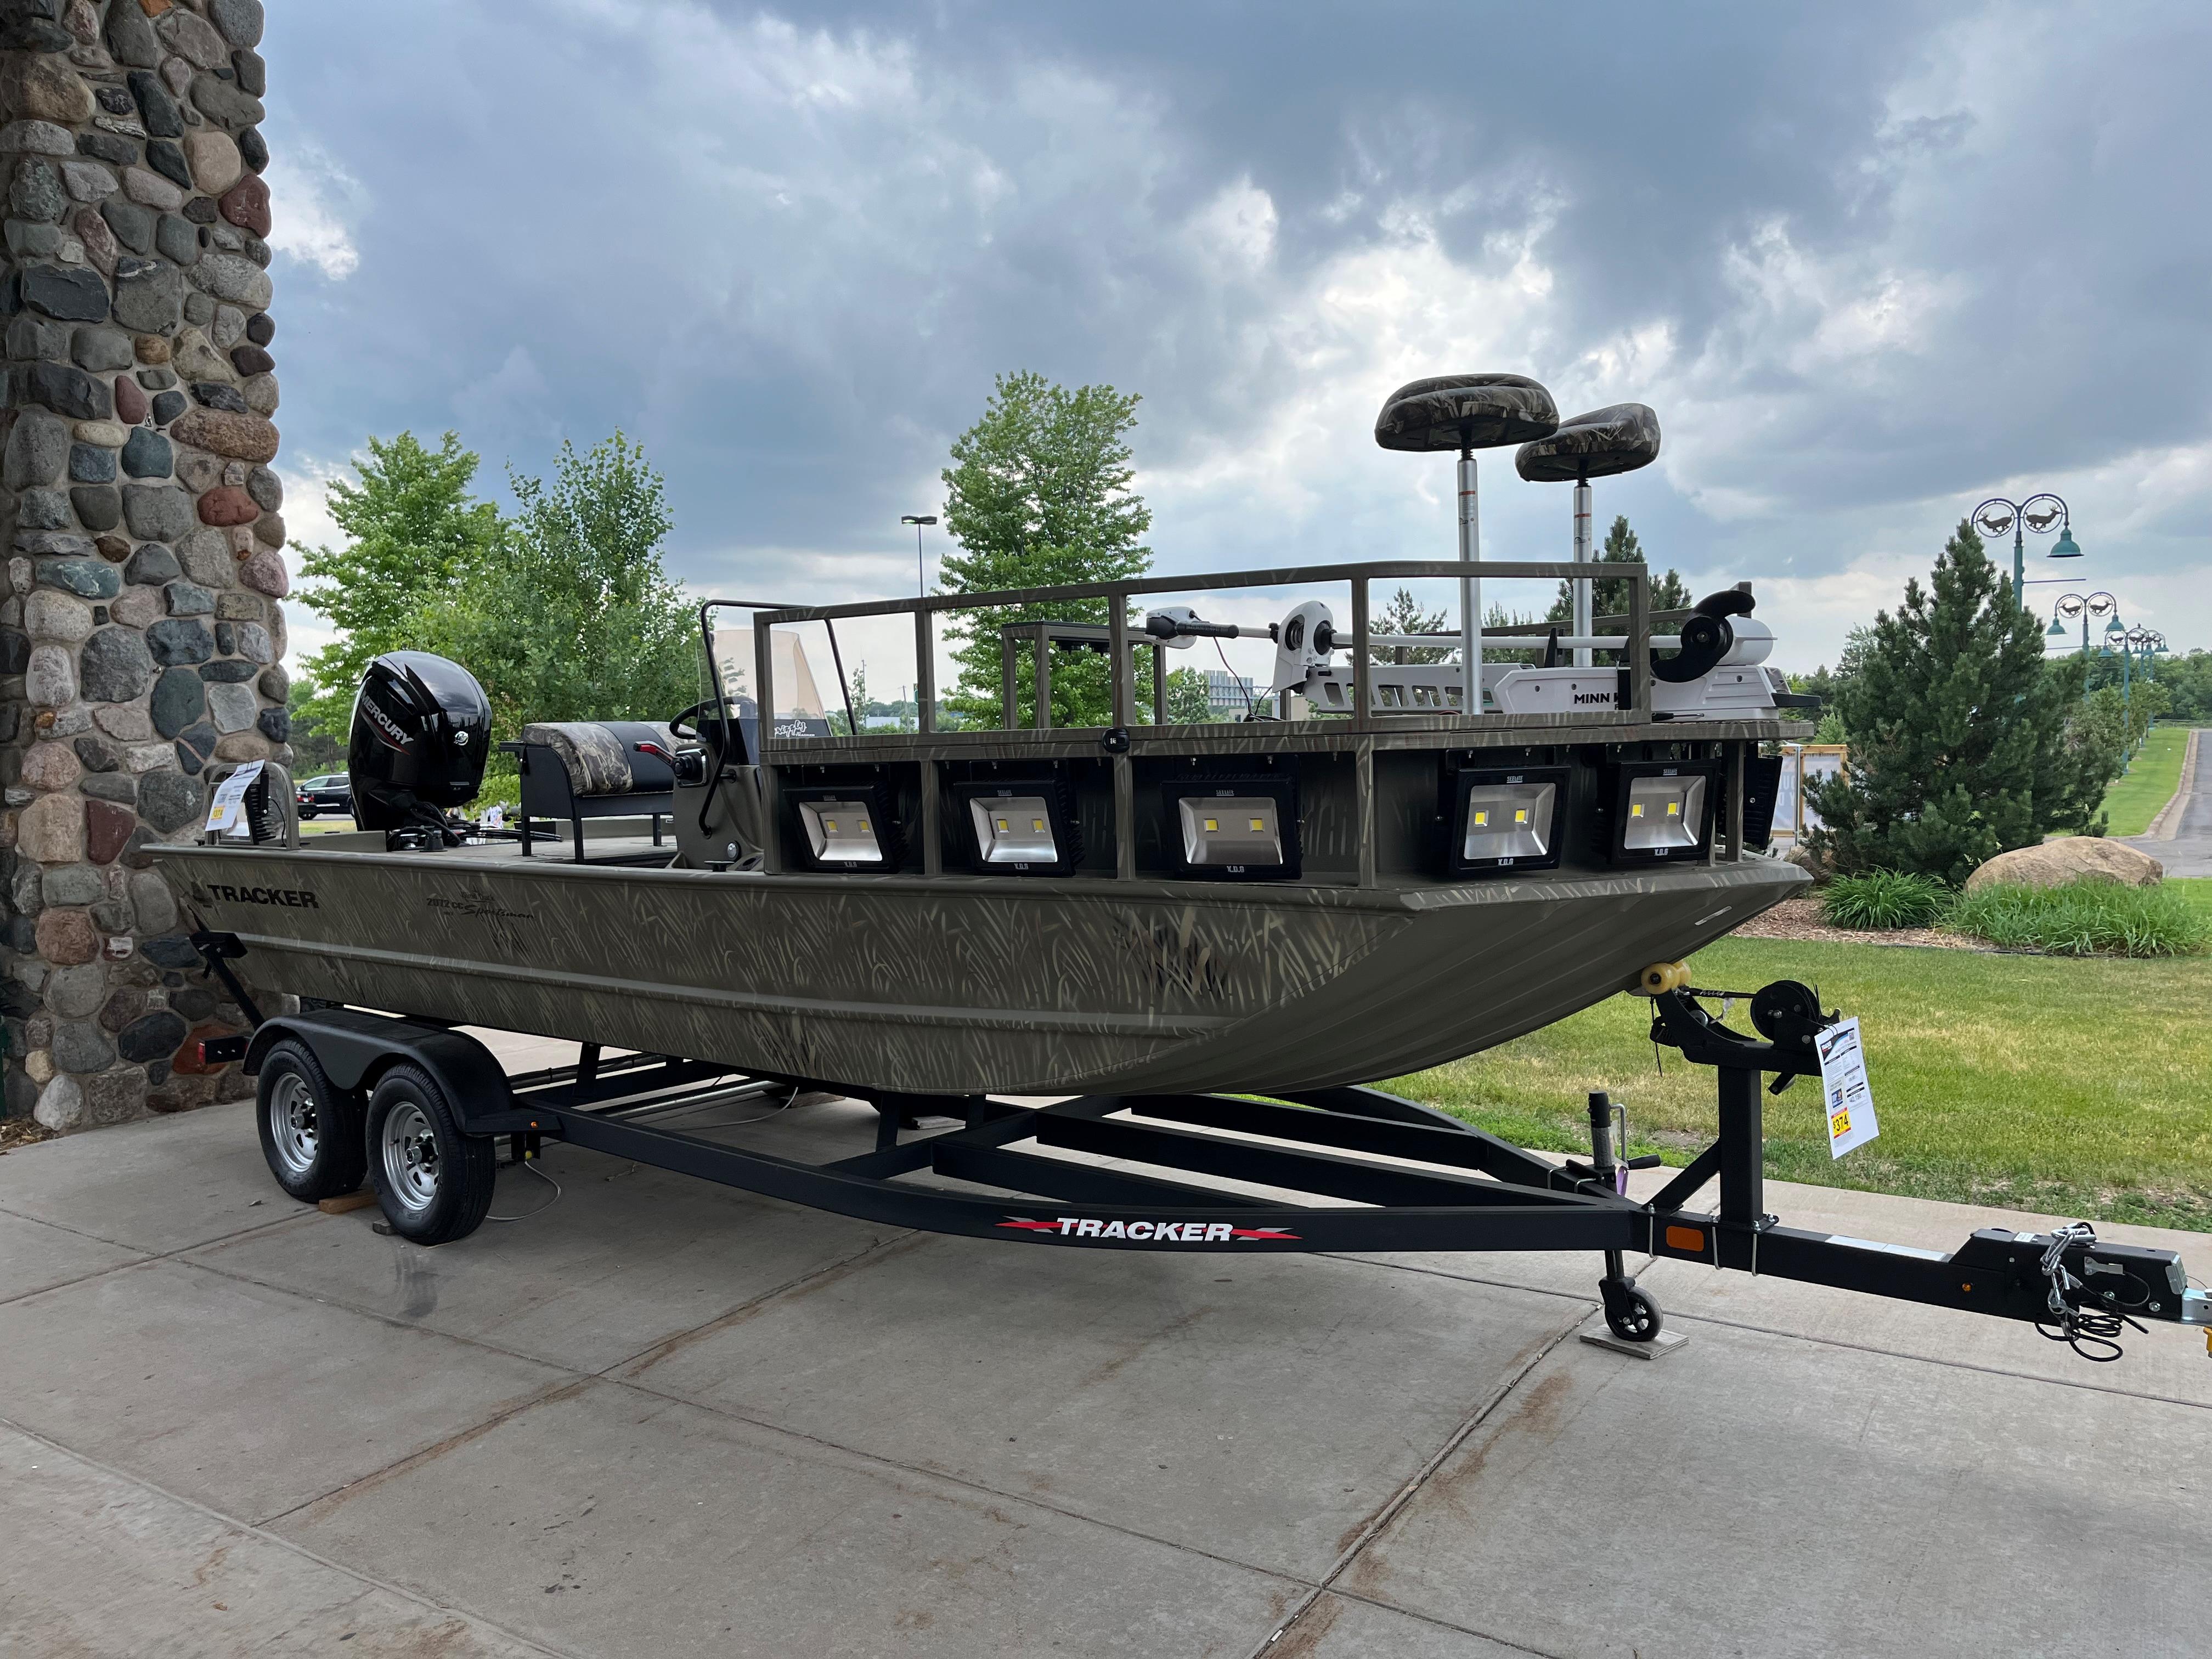 New 2023 Tracker Grizzly 2072 CC Sportsman, 55374 Rogers - Boat Trader